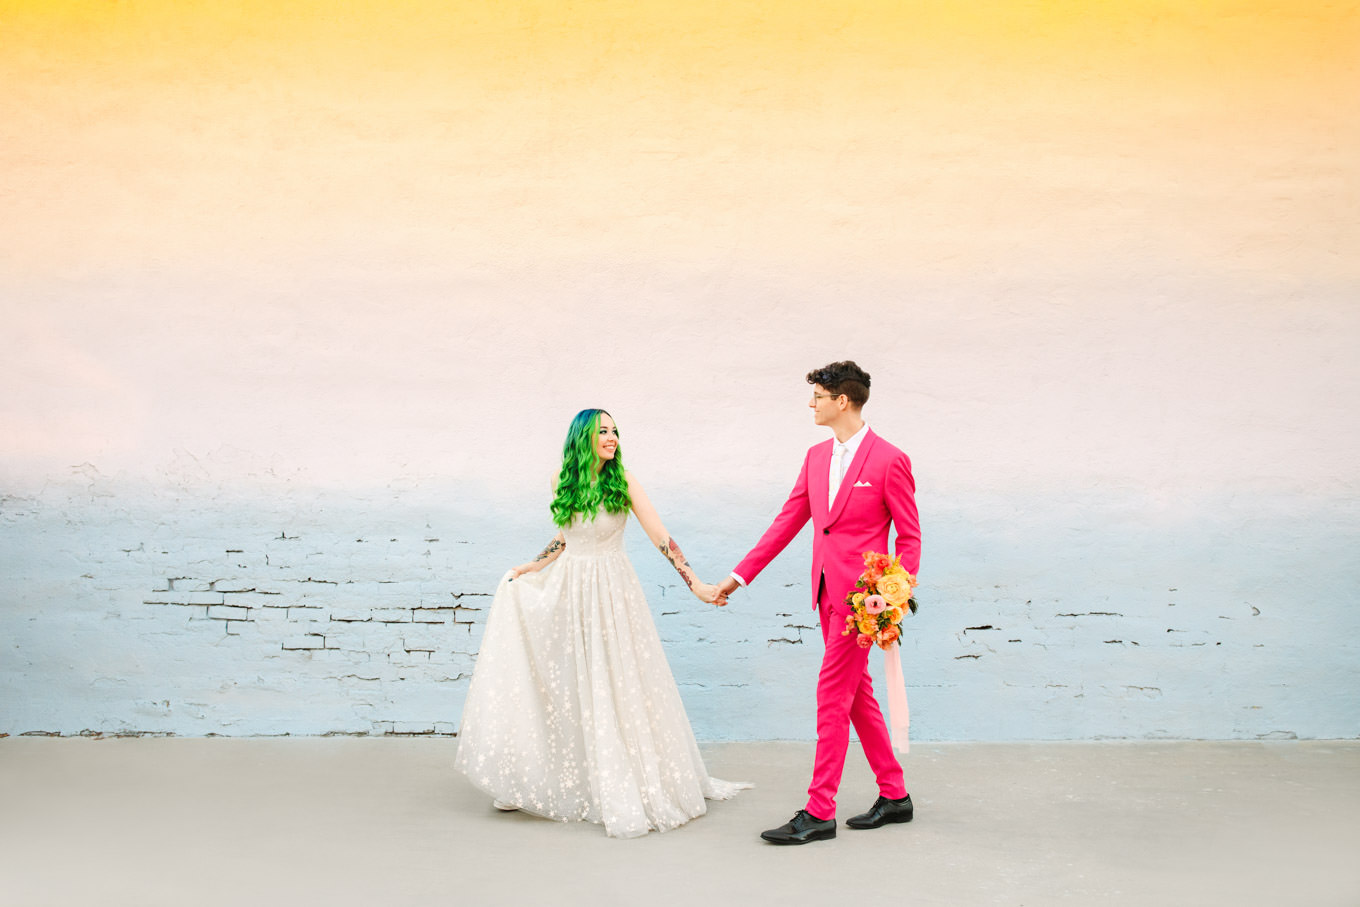 Unique Space wedding with groom in hot pink suit and bride with neon hair | Engagement, elopement, and wedding photography roundup of Mary Costa’s favorite images from 2020 | Colorful and elevated photography for fun-loving couples in Southern California | #2020wedding #elopement #weddingphoto #weddingphotography   Source: Mary Costa Photography | Los Angeles